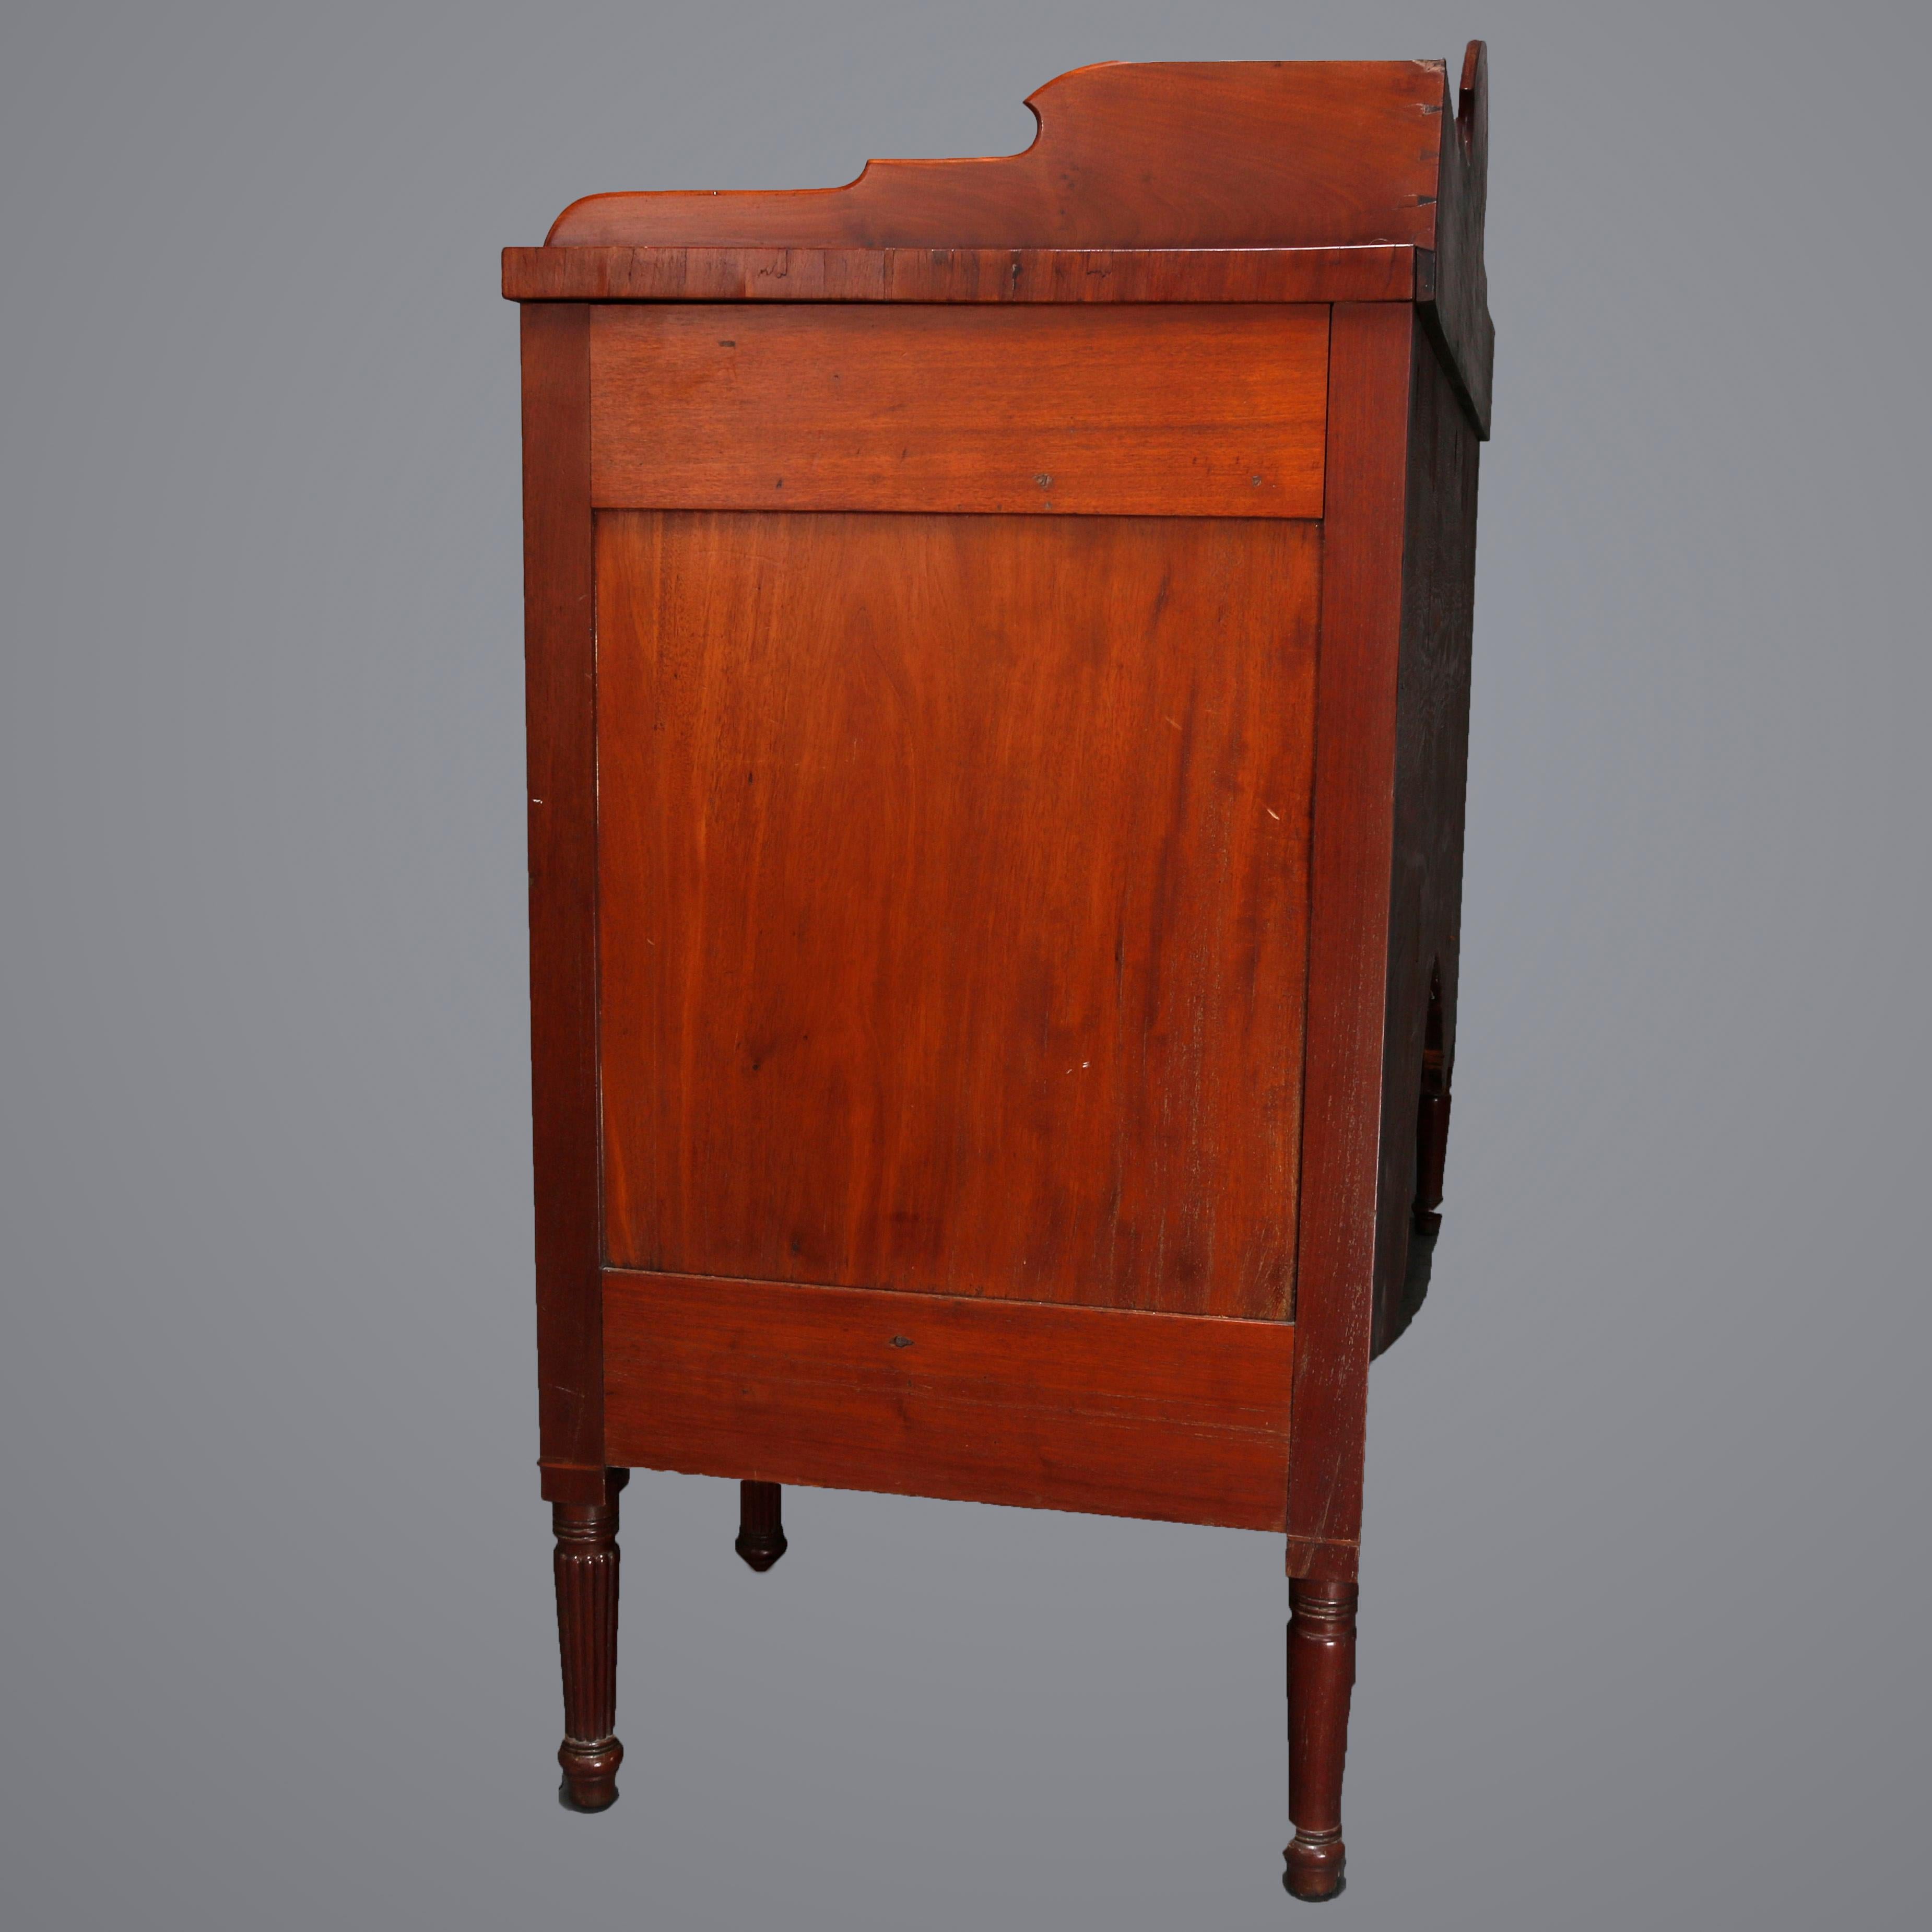 American Antique Period Sheraton Flame Mahogany Bow-Front Sideboard, 19th Century